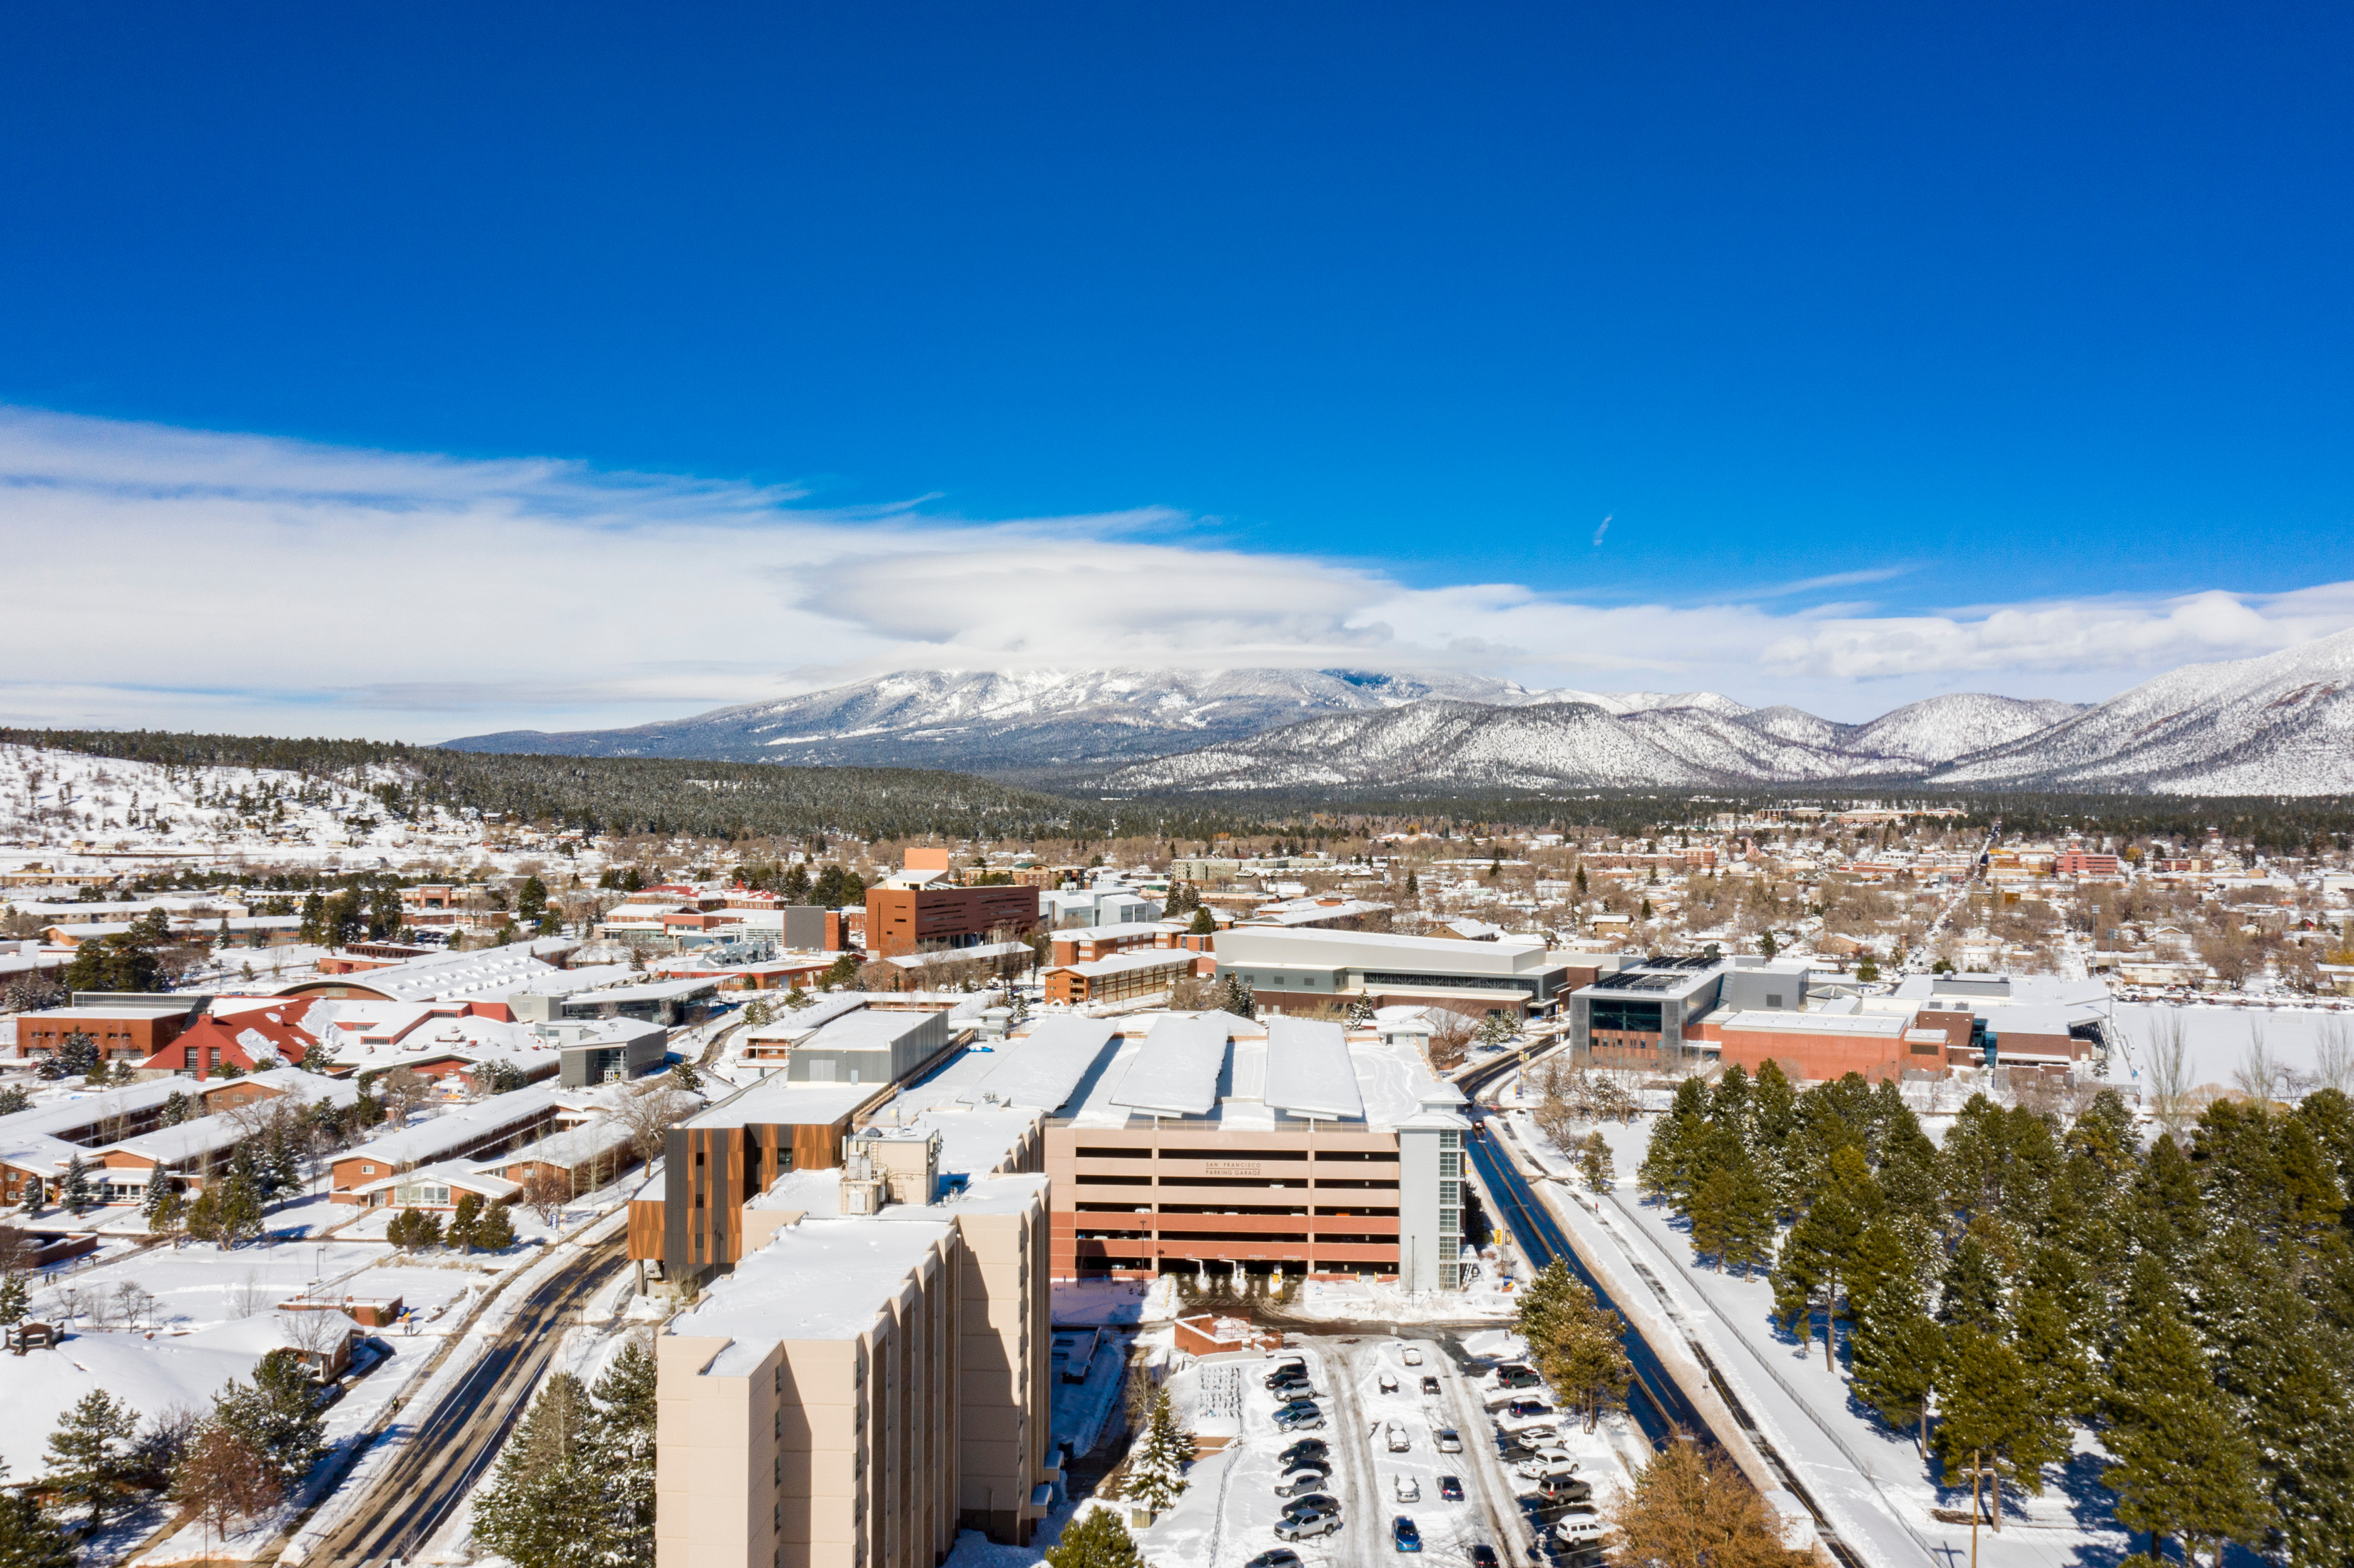 A snowy Flagstaff campus with mountains in the distance.